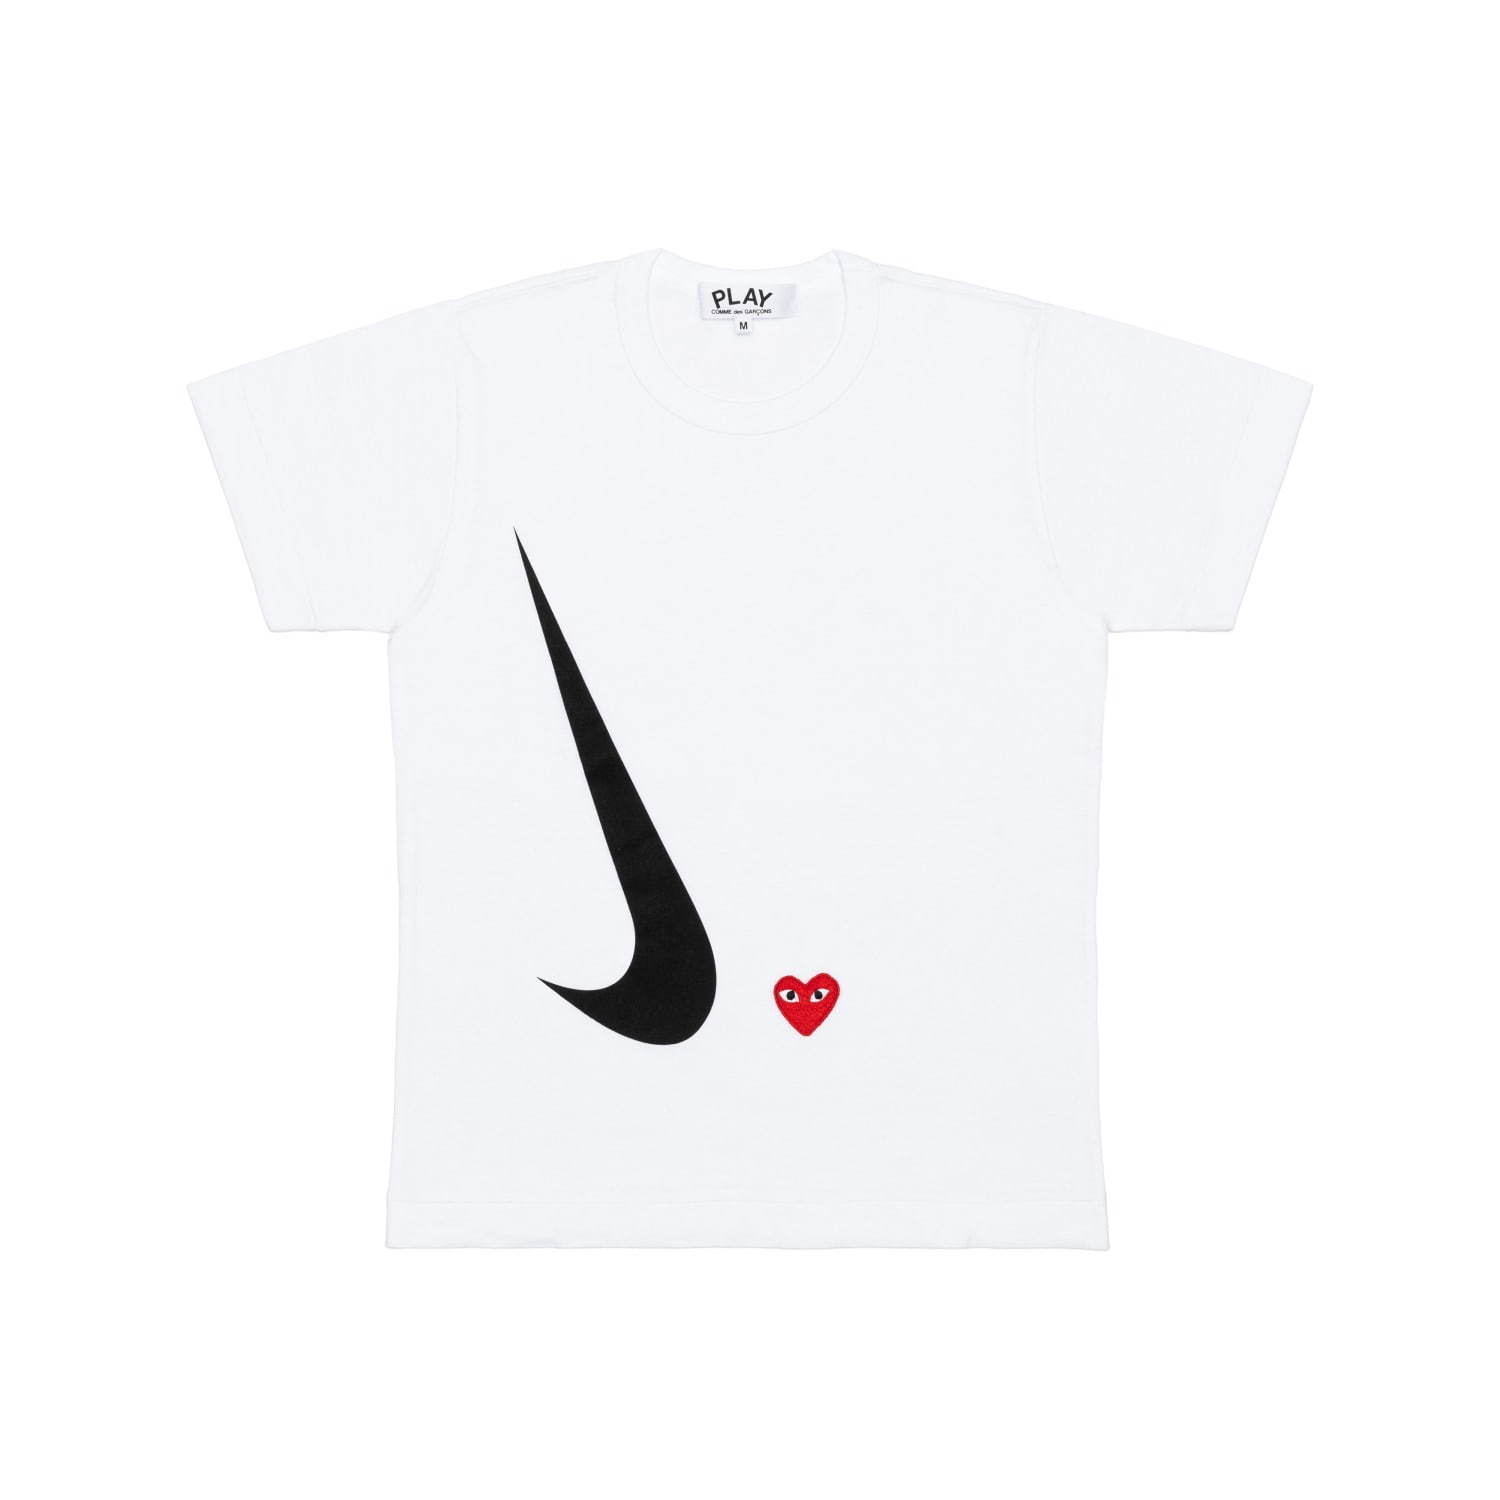 PLAY COMME des GARCONS NIKE ナイキ パーカー